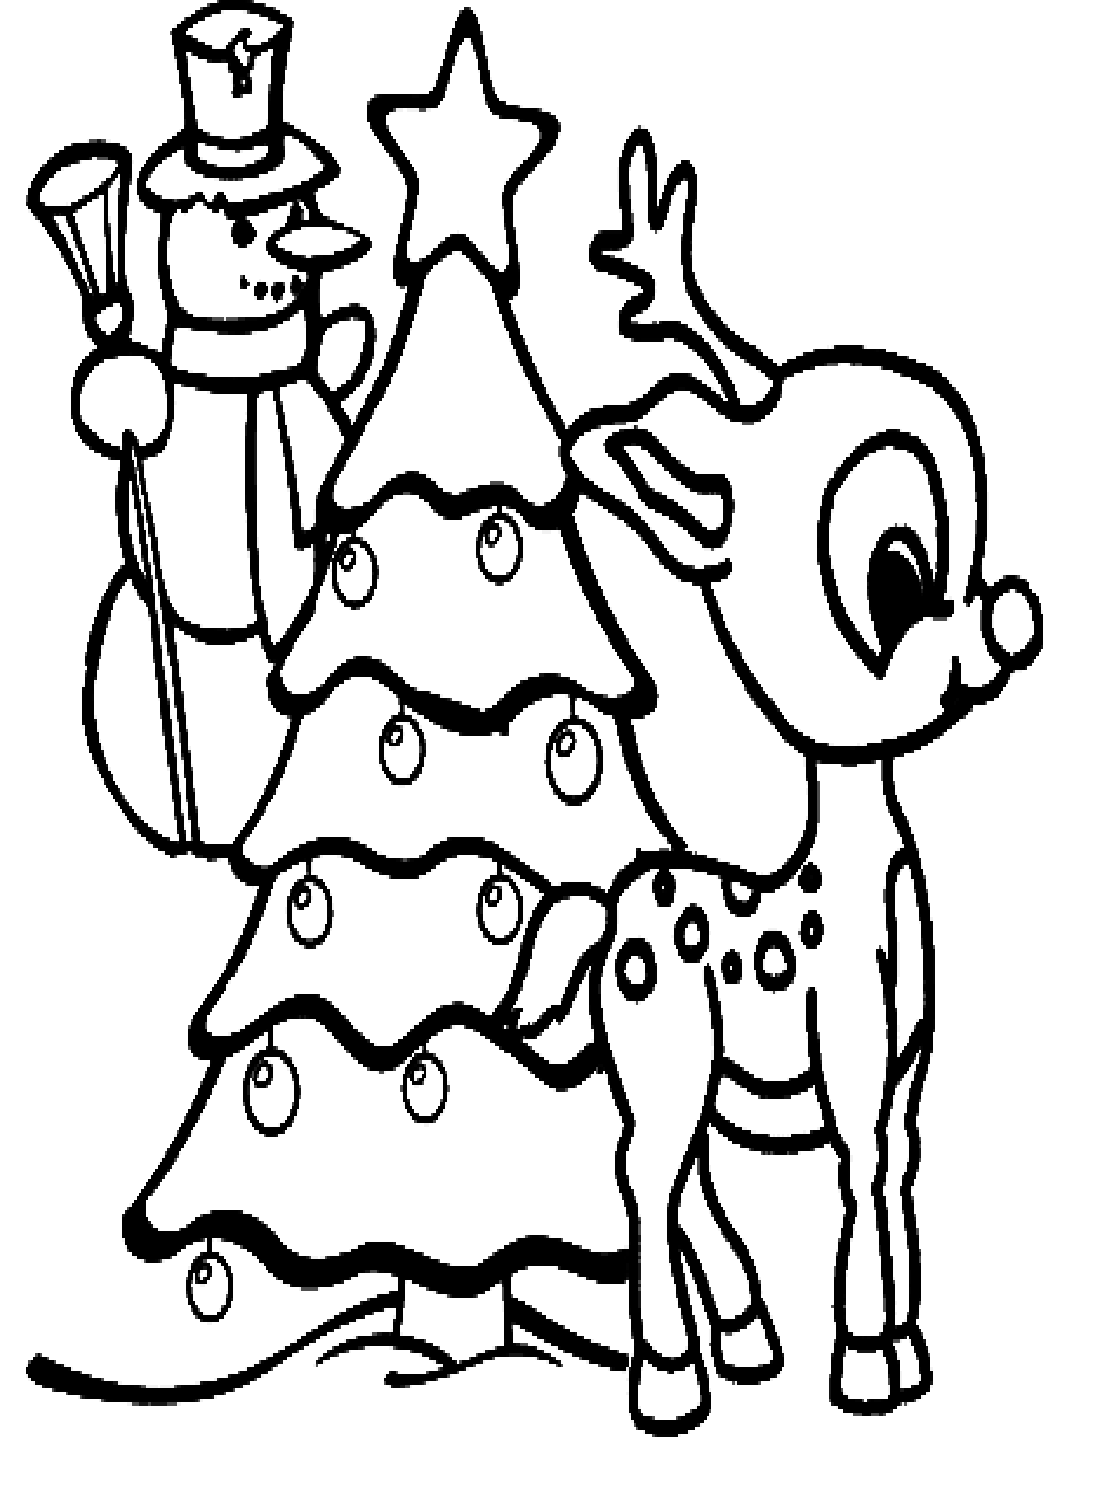 Christmas Rudolph Coloring Page - Free Printable Coloring Pages